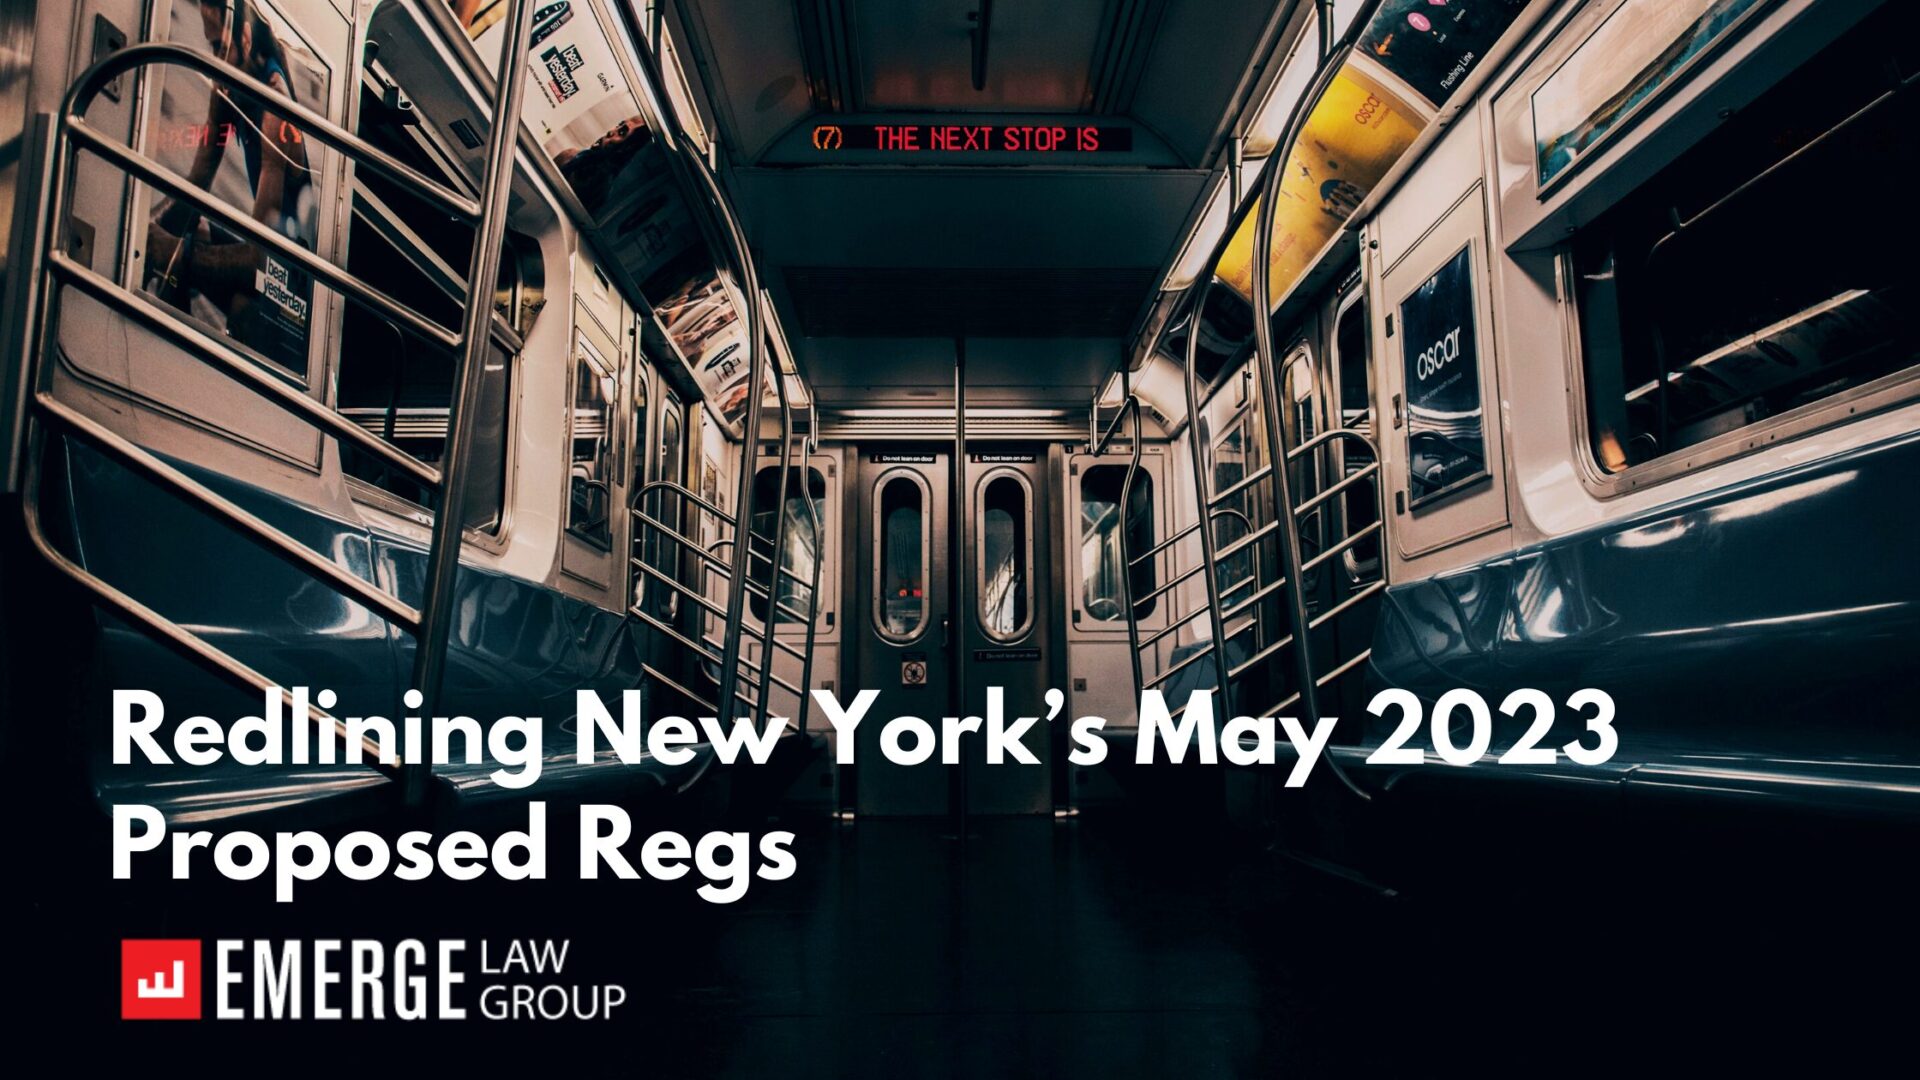 Redlining New York’s May 2023 Proposed Regs